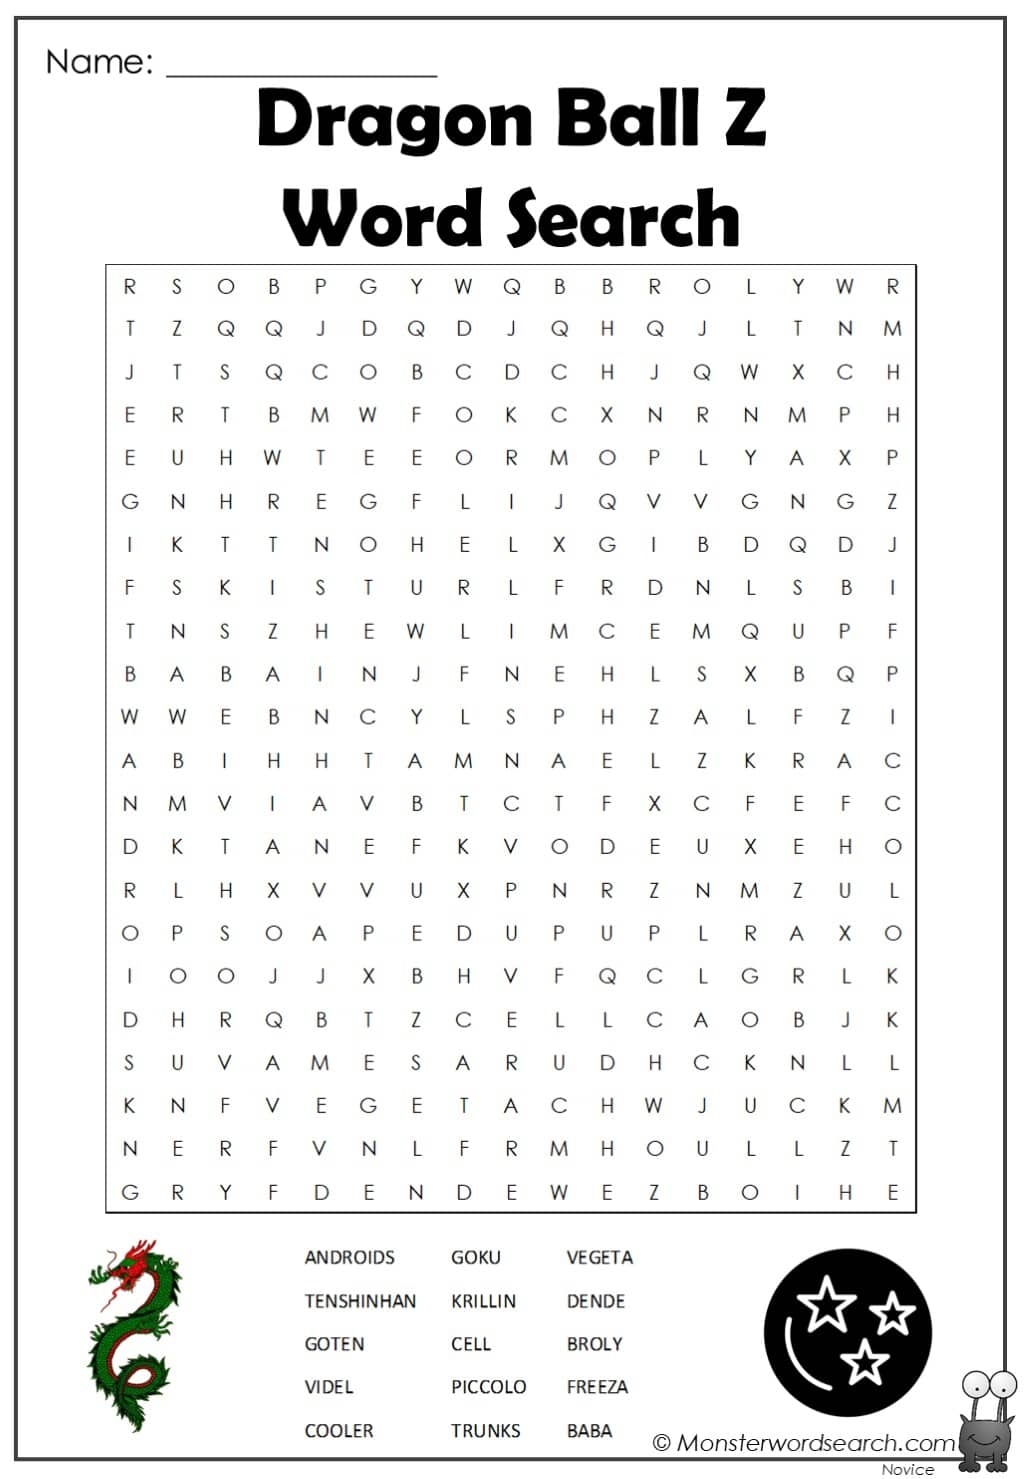 Dragon Ball Z Word Search Monster Word Search